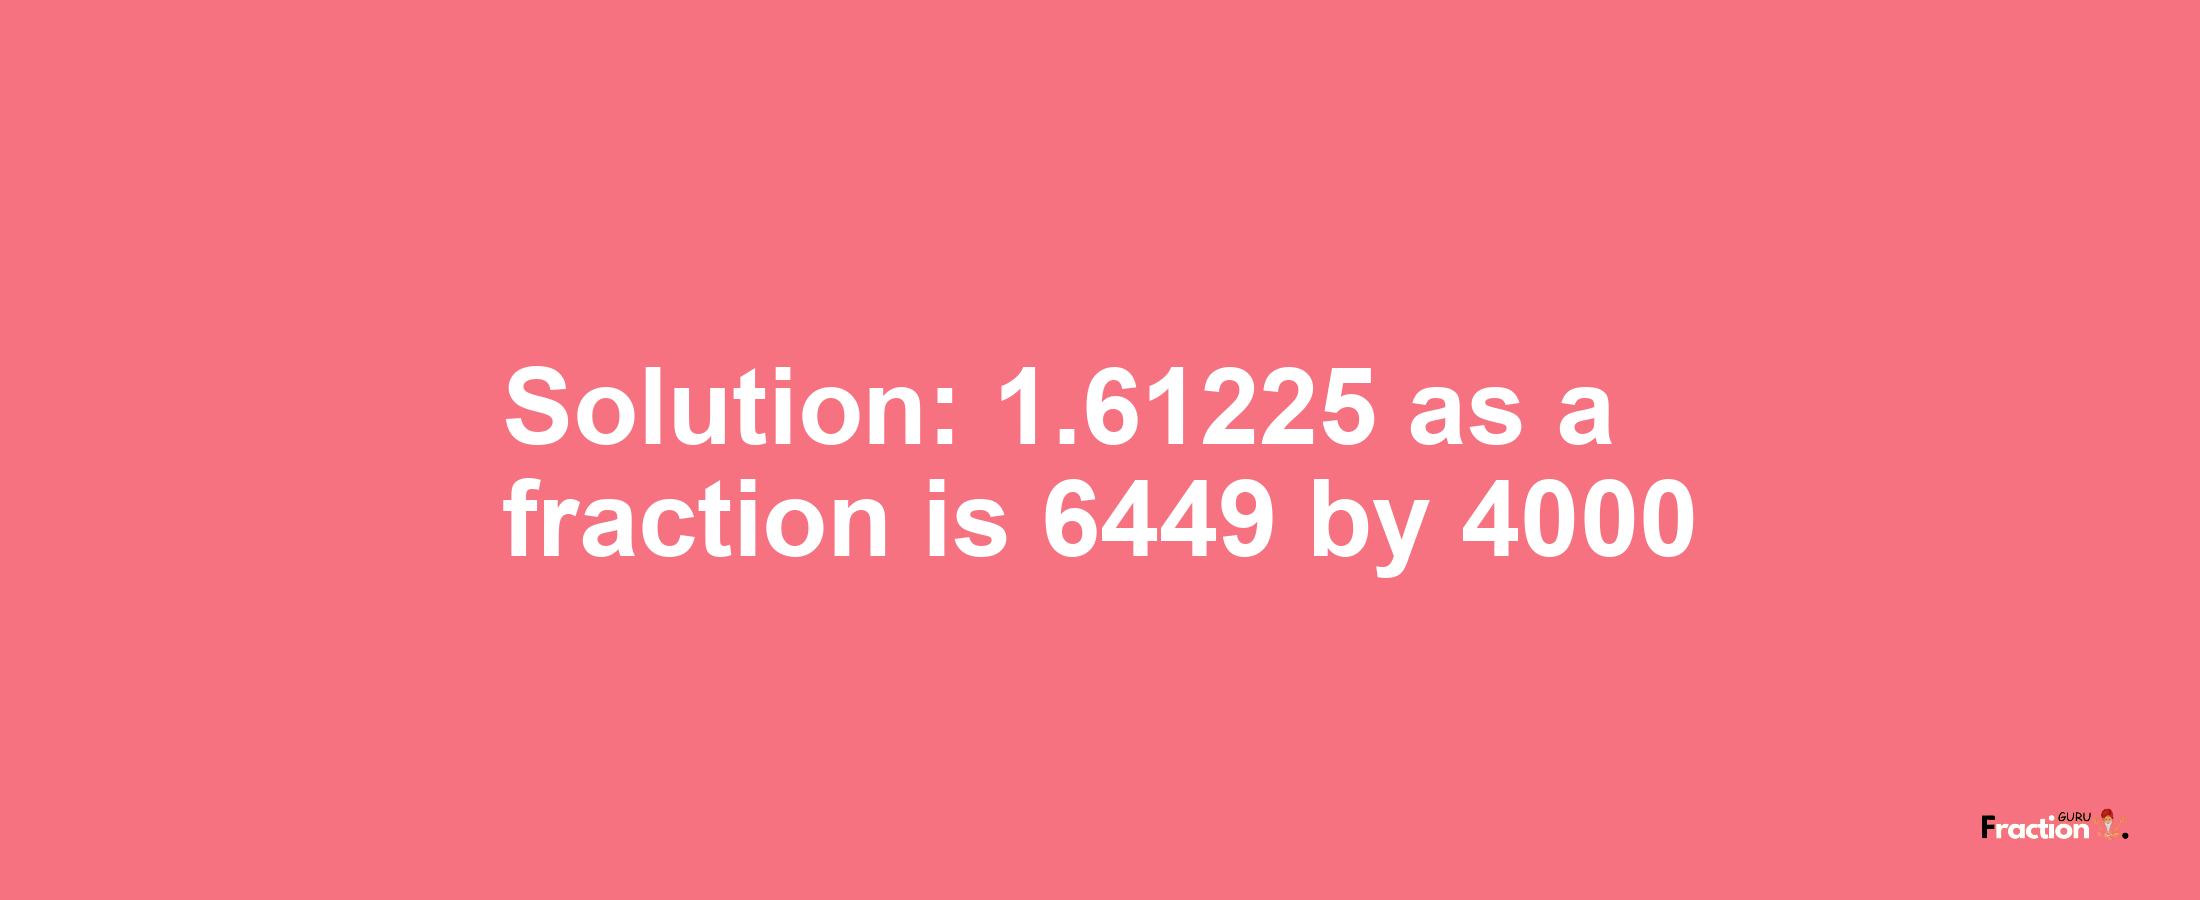 Solution:1.61225 as a fraction is 6449/4000